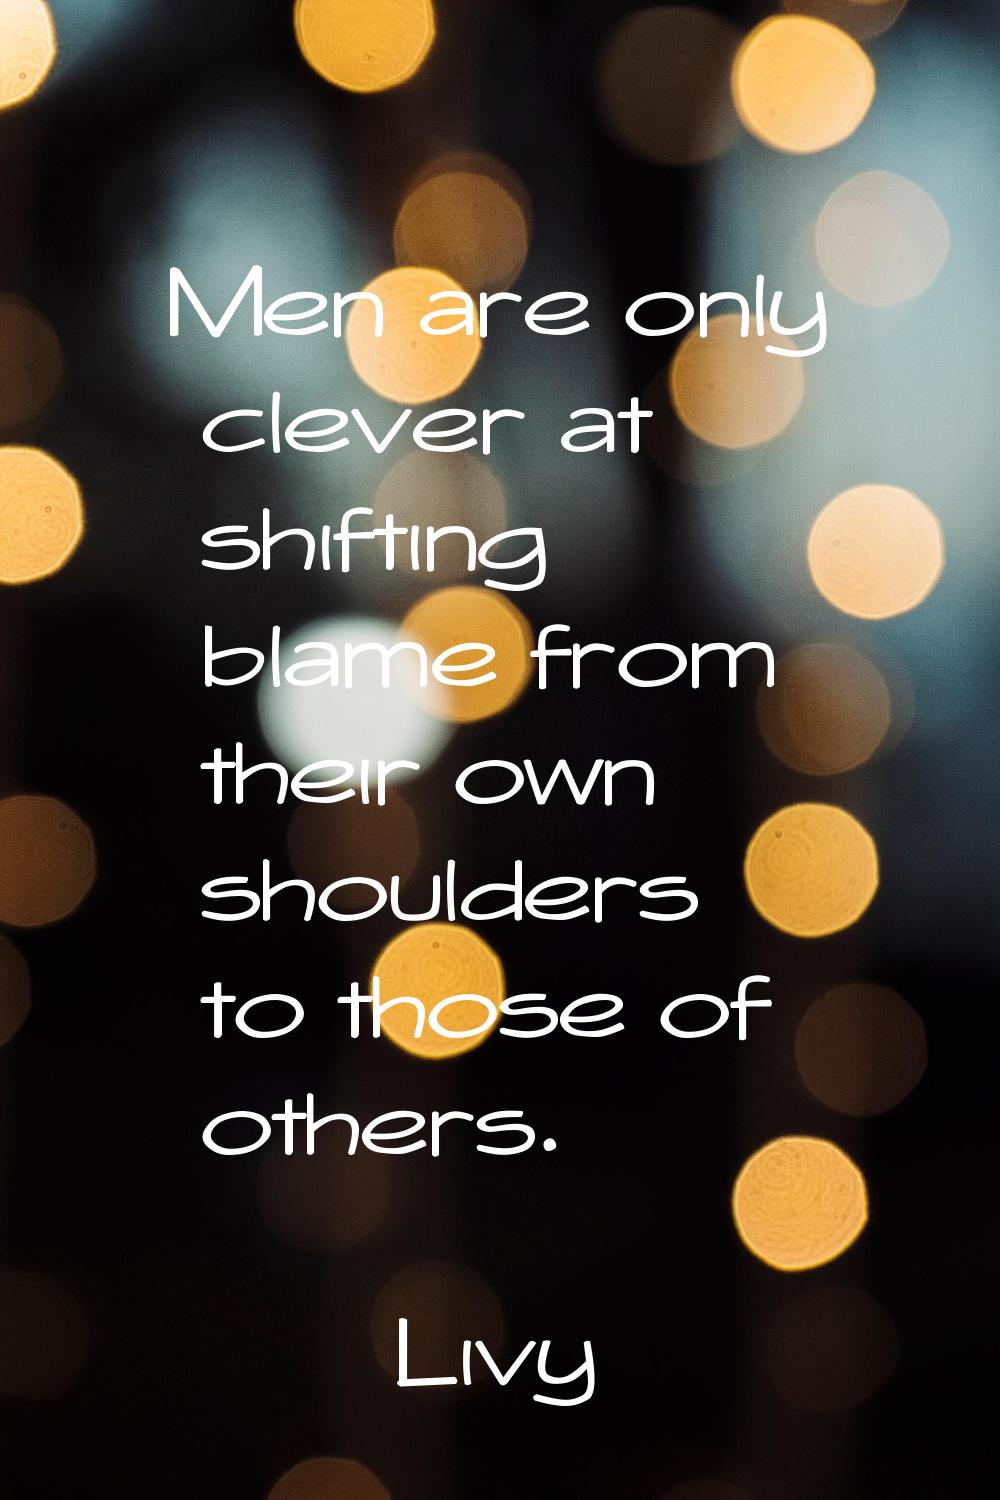 Men are only clever at shifting blame from their own shoulders to those of others.